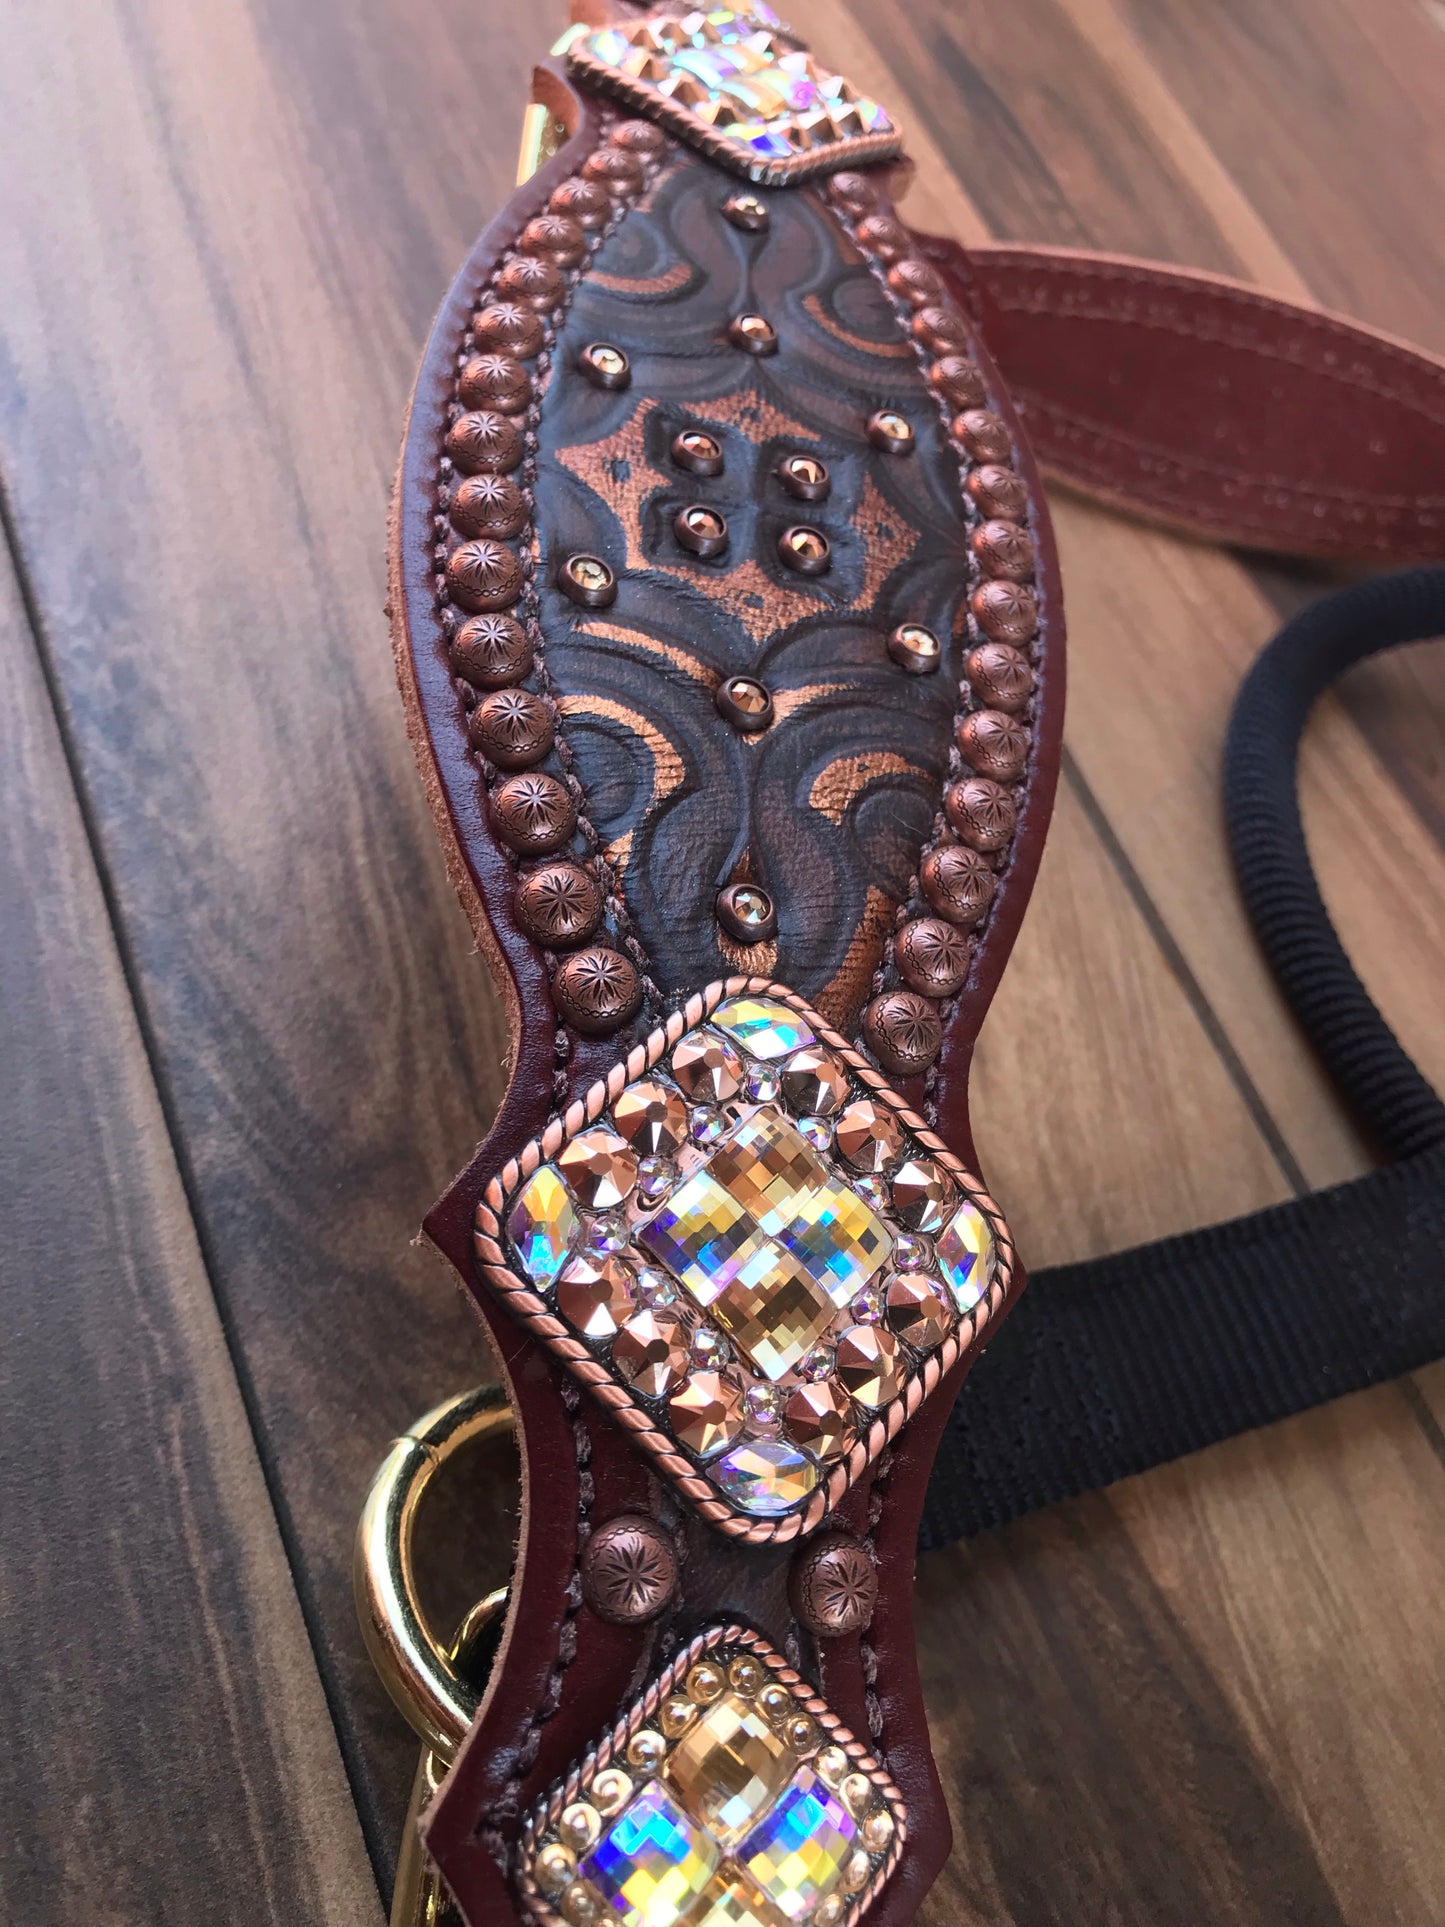 Brown Tooled leather with Crystals and Copper Spots